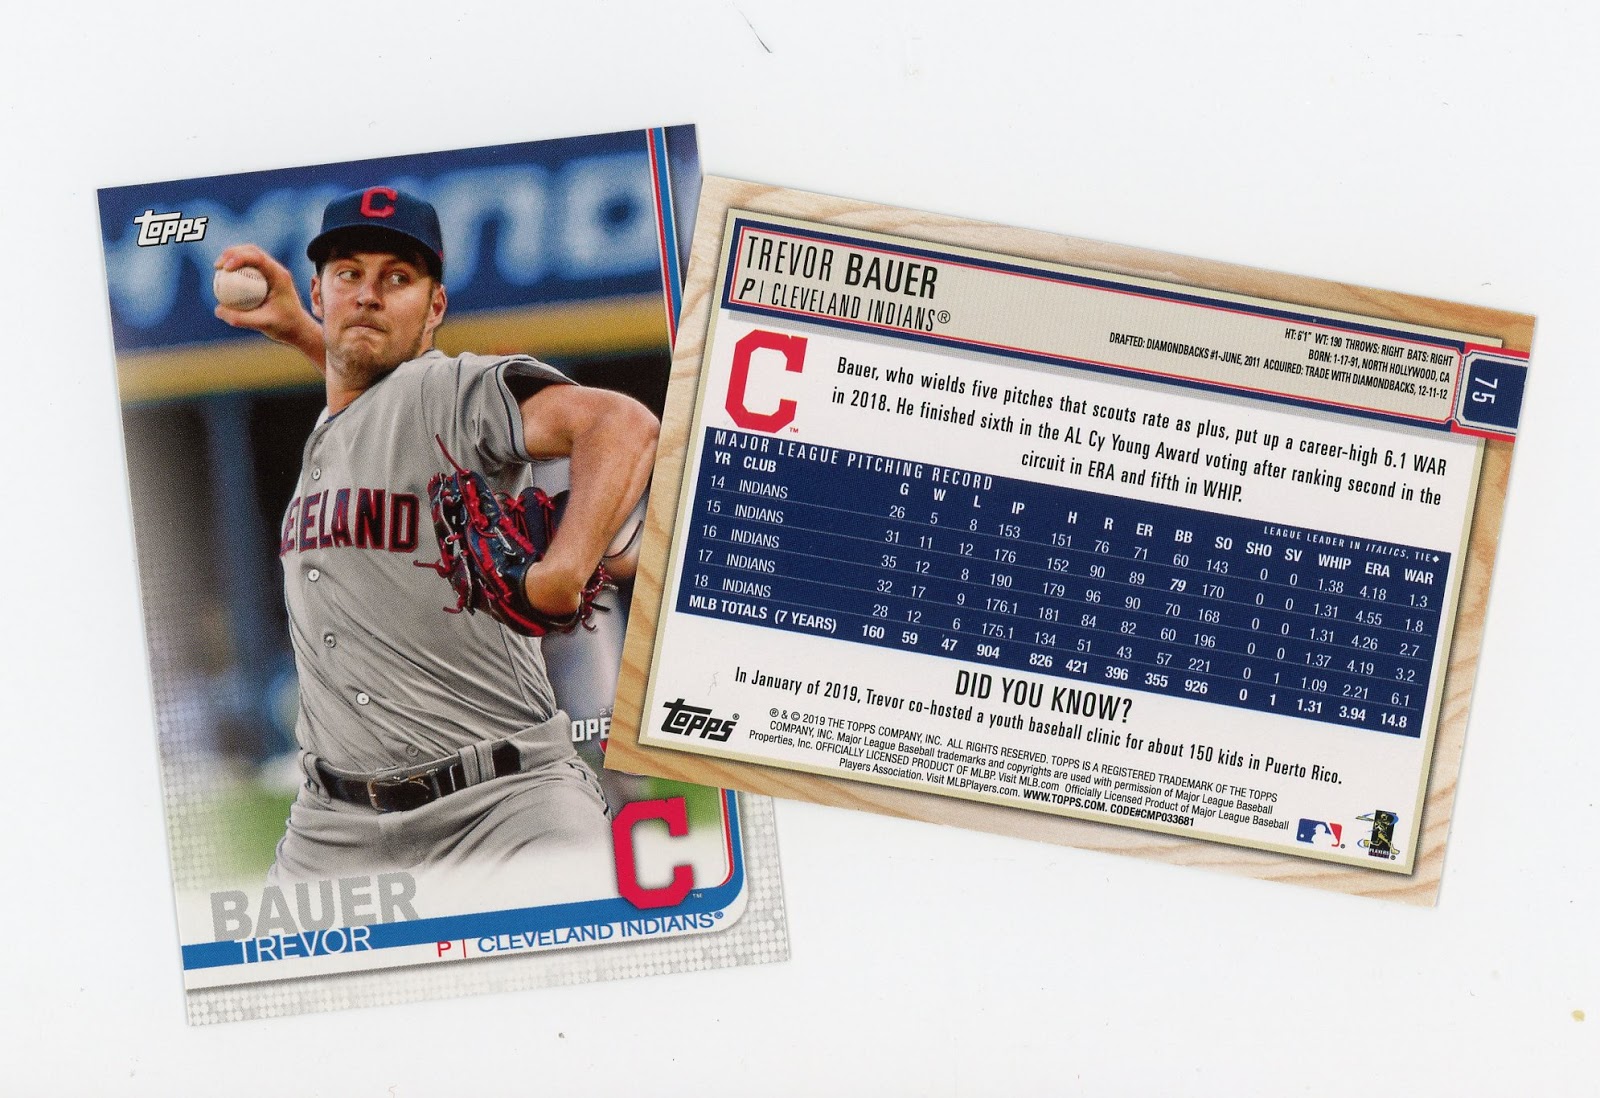 Baseball card of starting pitcher Trevor Bauer, recently traded from the Indians to the Reds. Bauer is an early adopter of high-tech gadgets to improve his game.